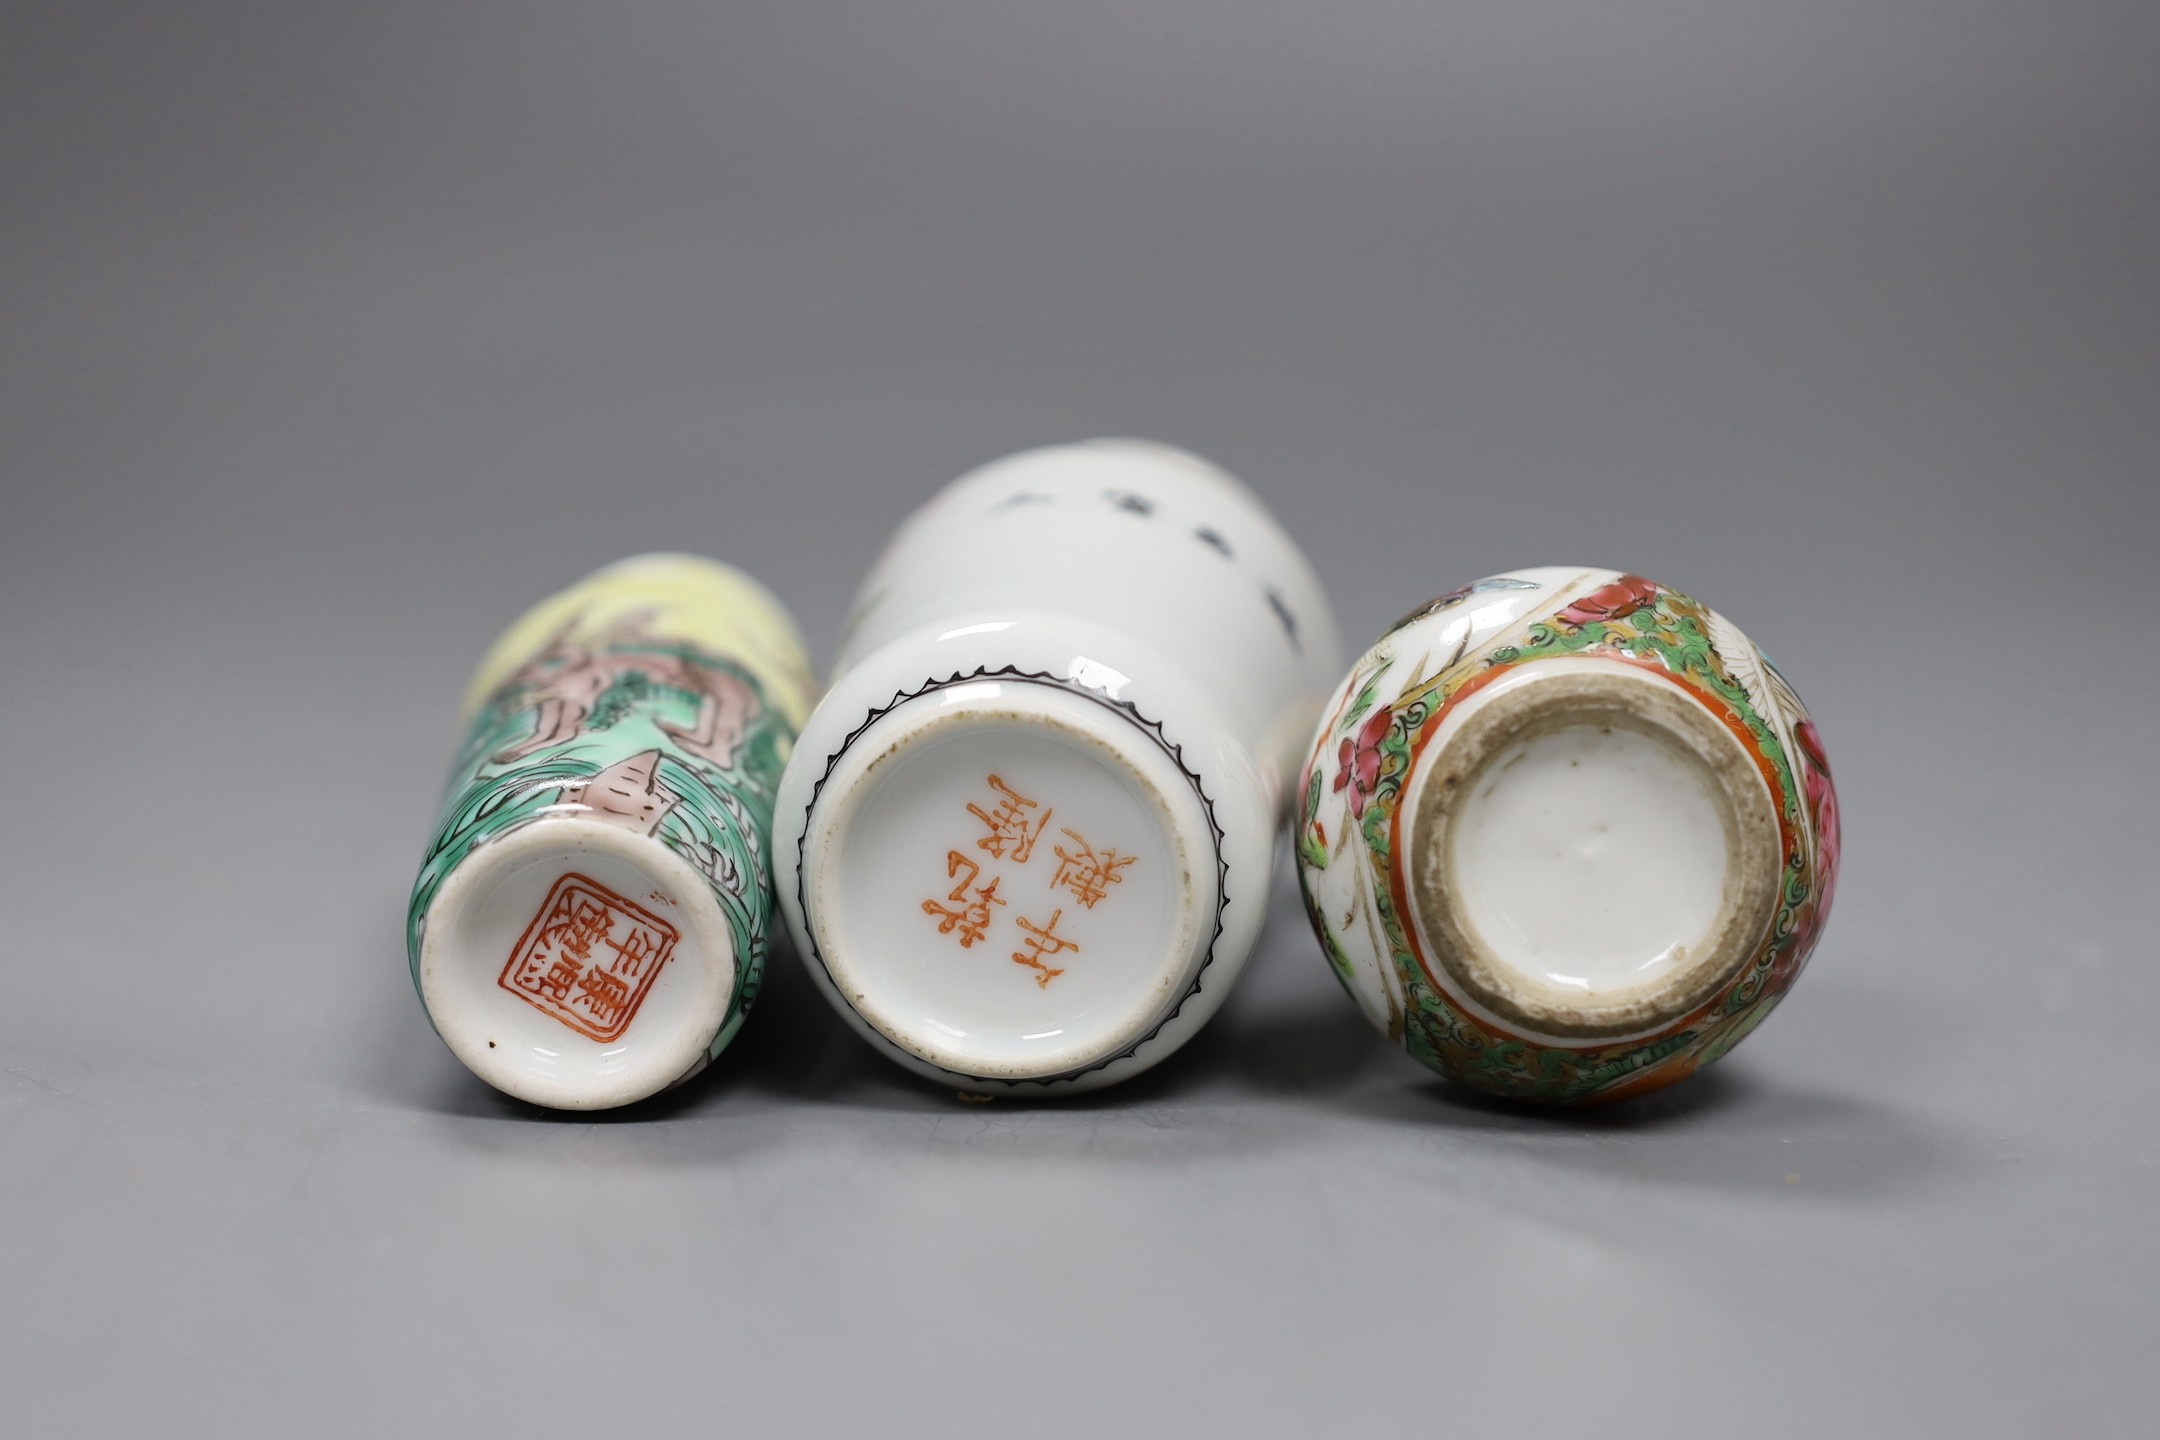 Three Chinese enamelled porcelain miniature vases, late 19th century / Republic period, tallest 10cms high